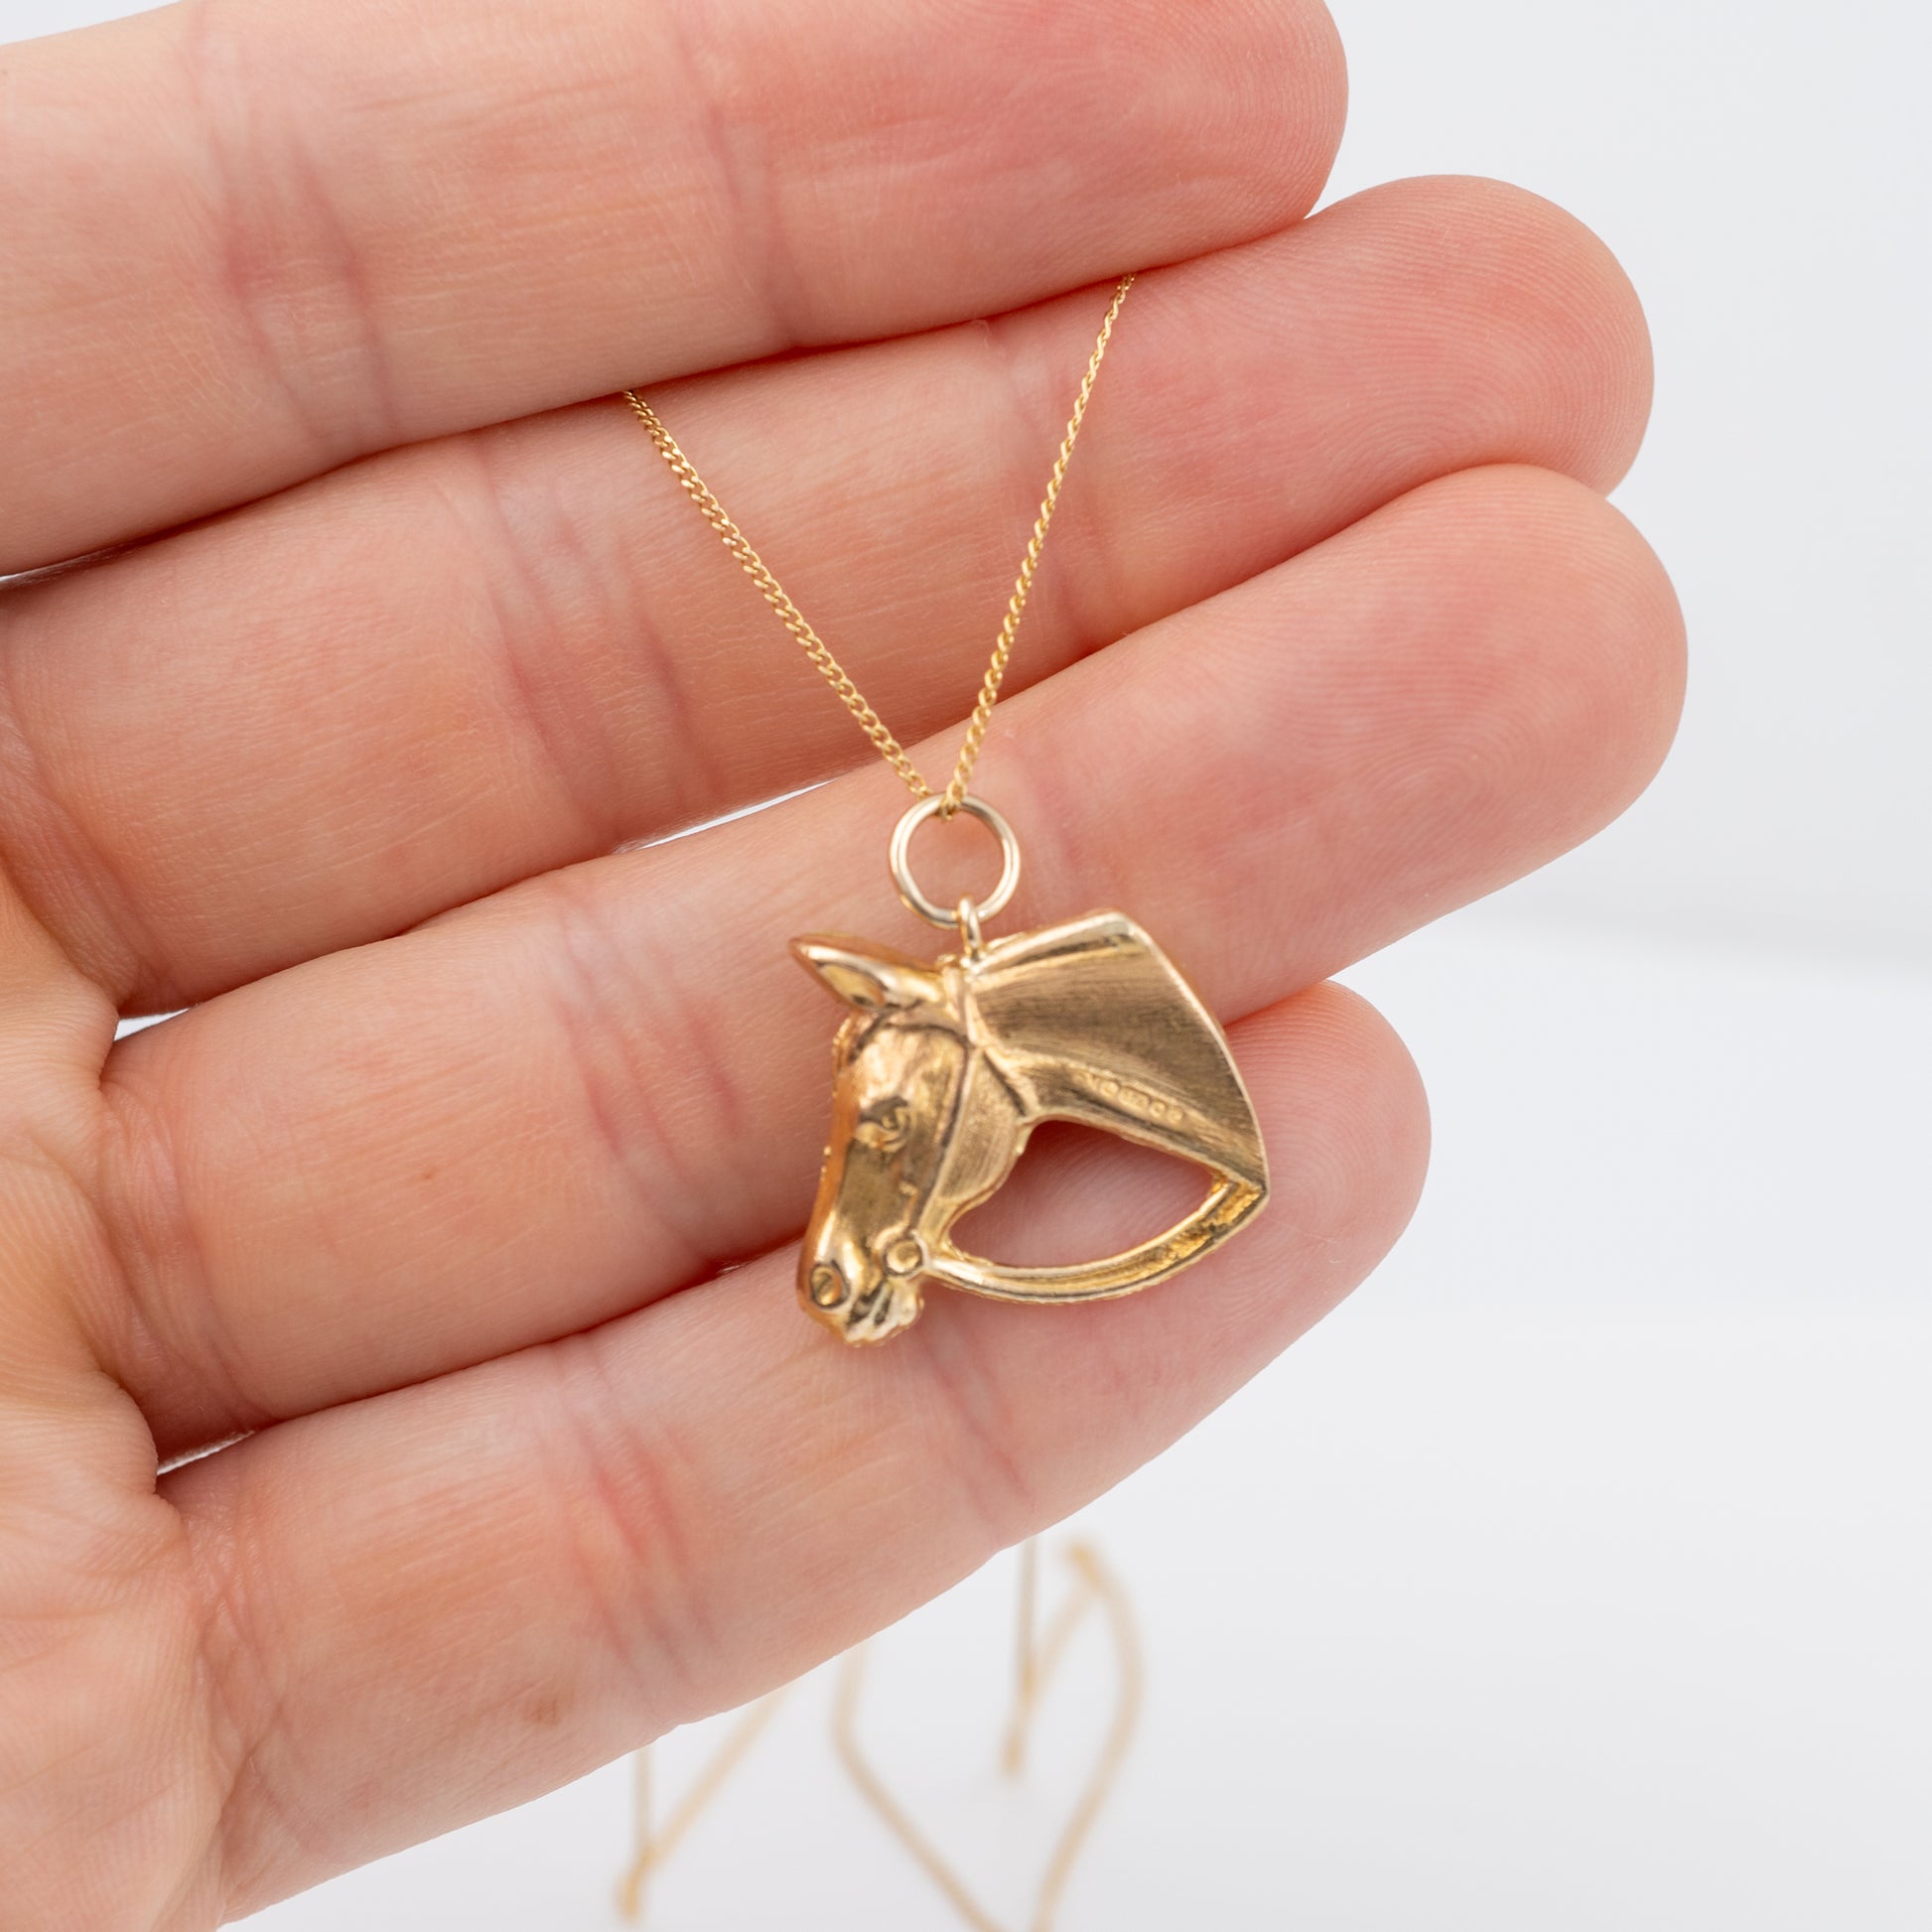 horse gifts 9ct gold horse necklace